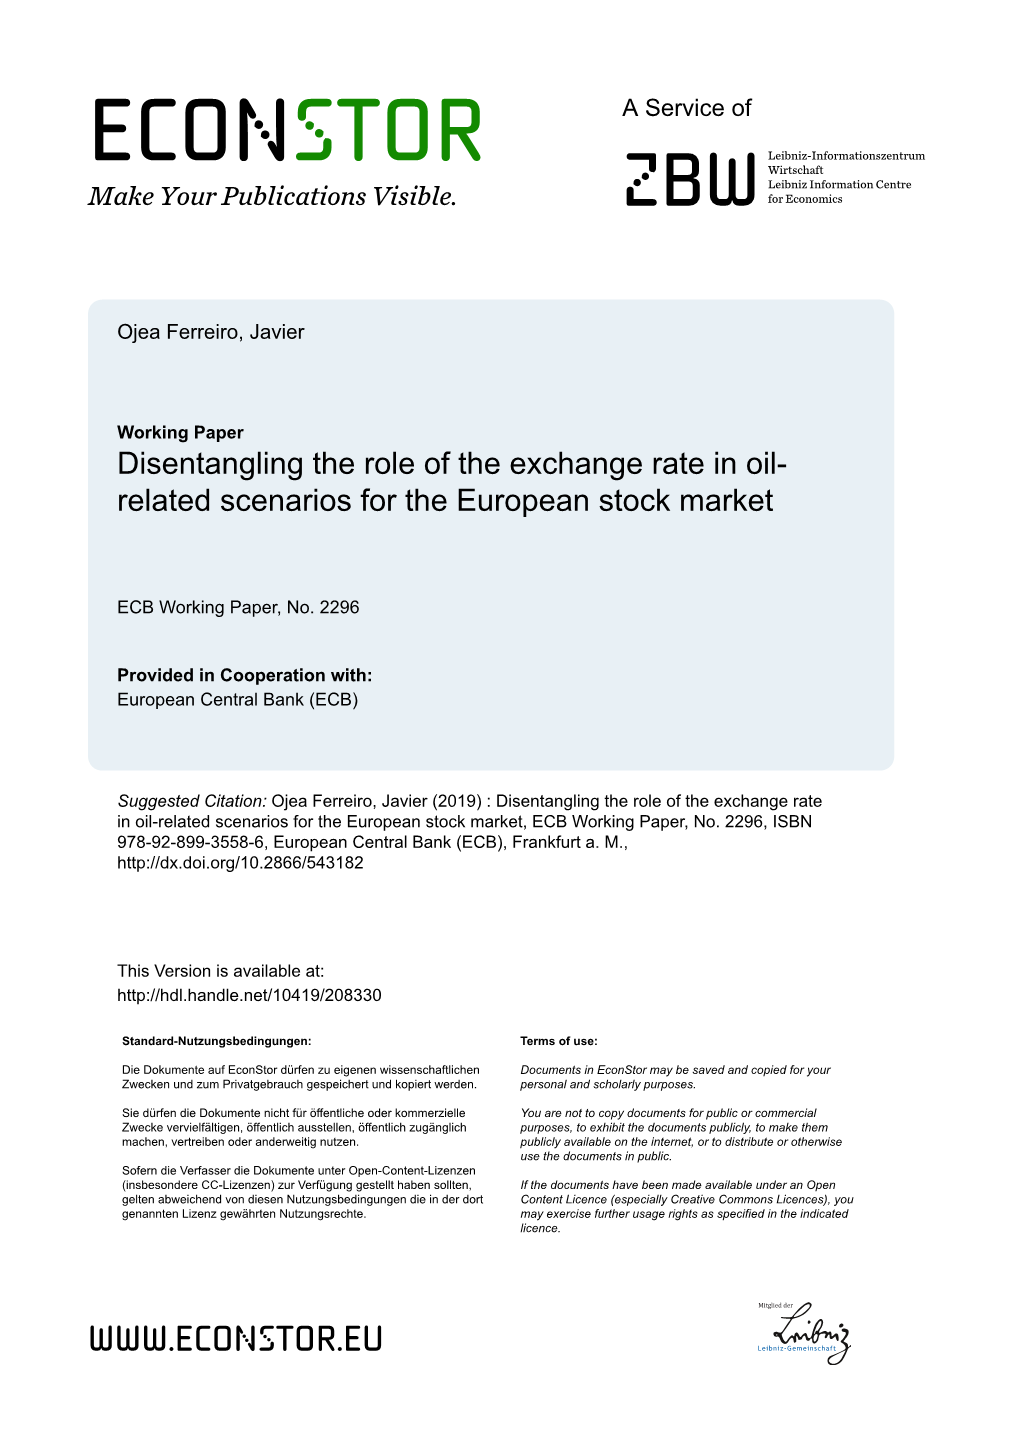 Disentangling the Role of the Exchange Rate in Oil- Related Scenarios for the European Stock Market